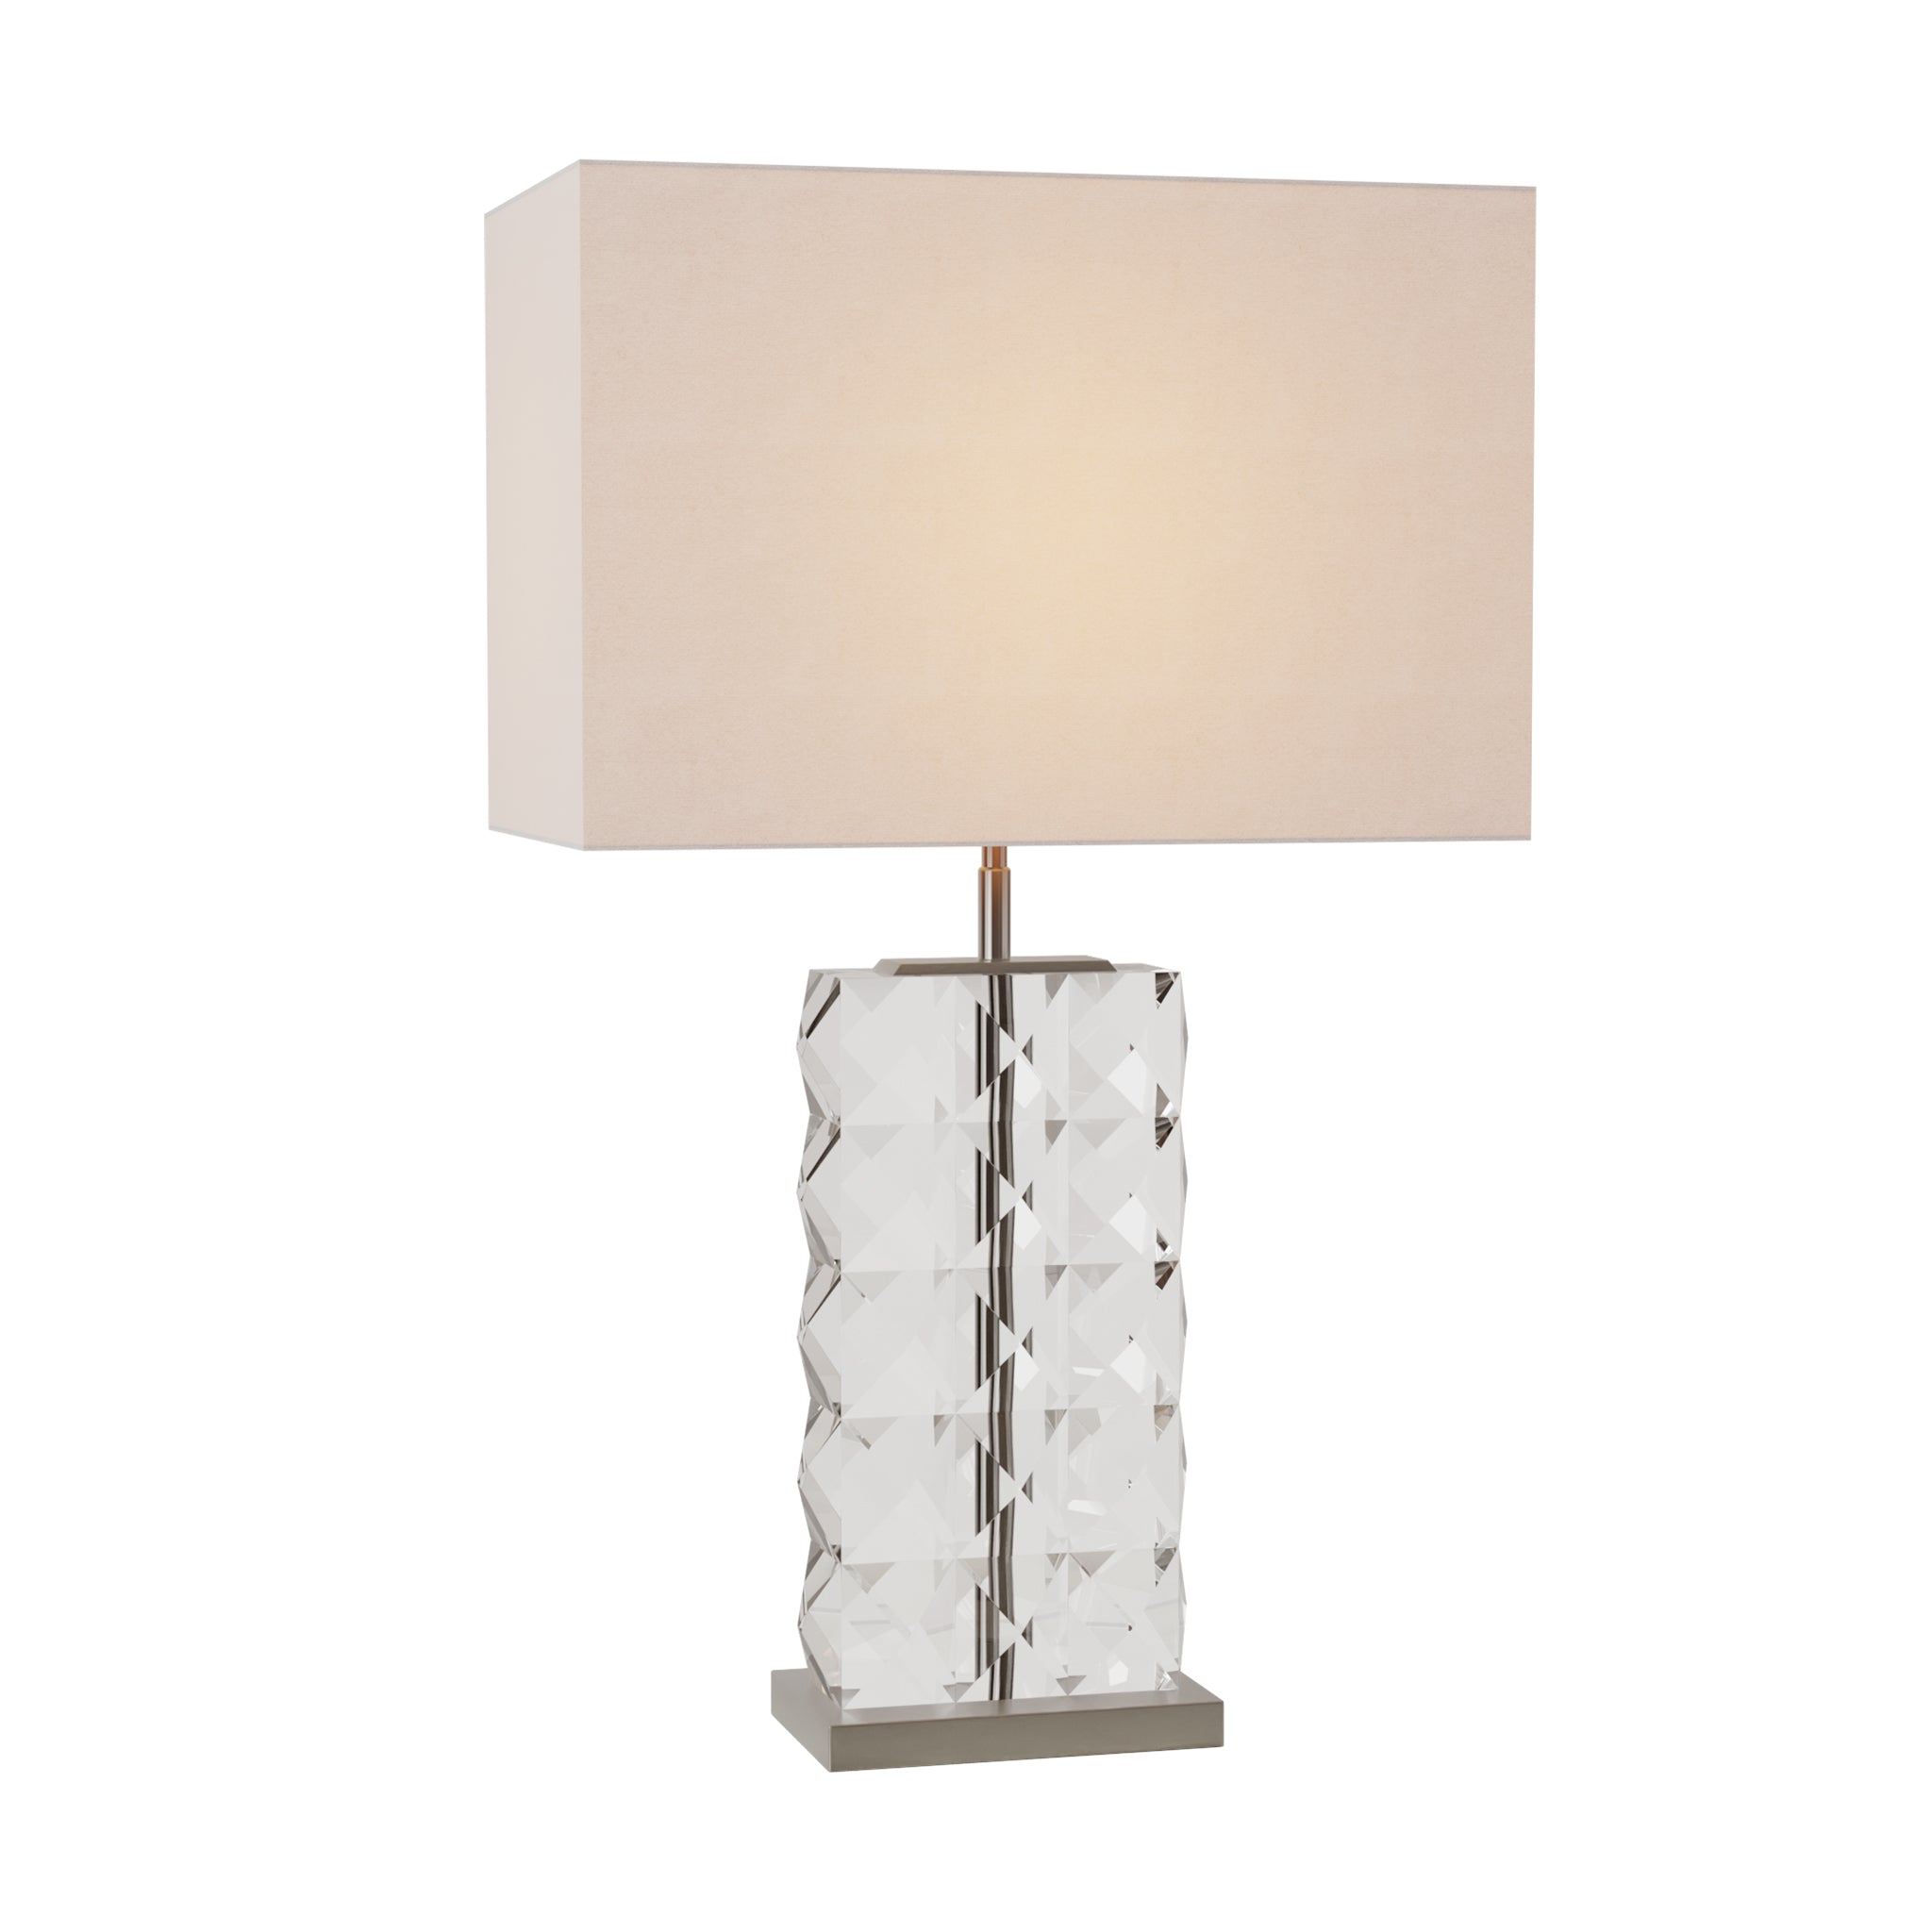 that's living glaring grande crystal table lamp
clear nickel table lamps 